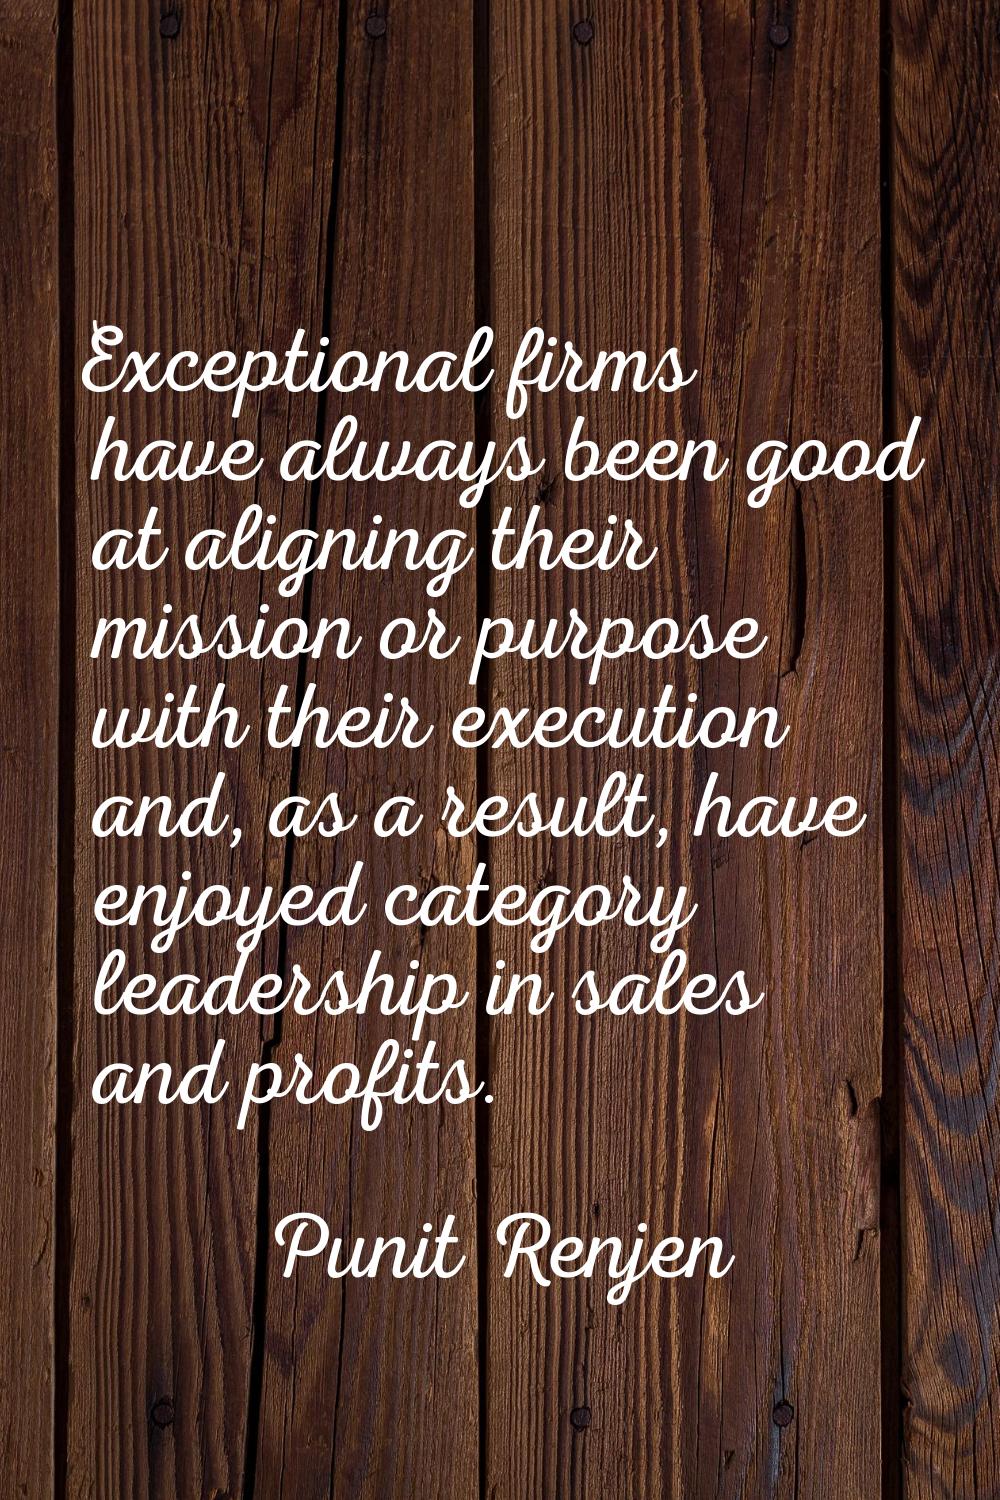 Exceptional firms have always been good at aligning their mission or purpose with their execution a